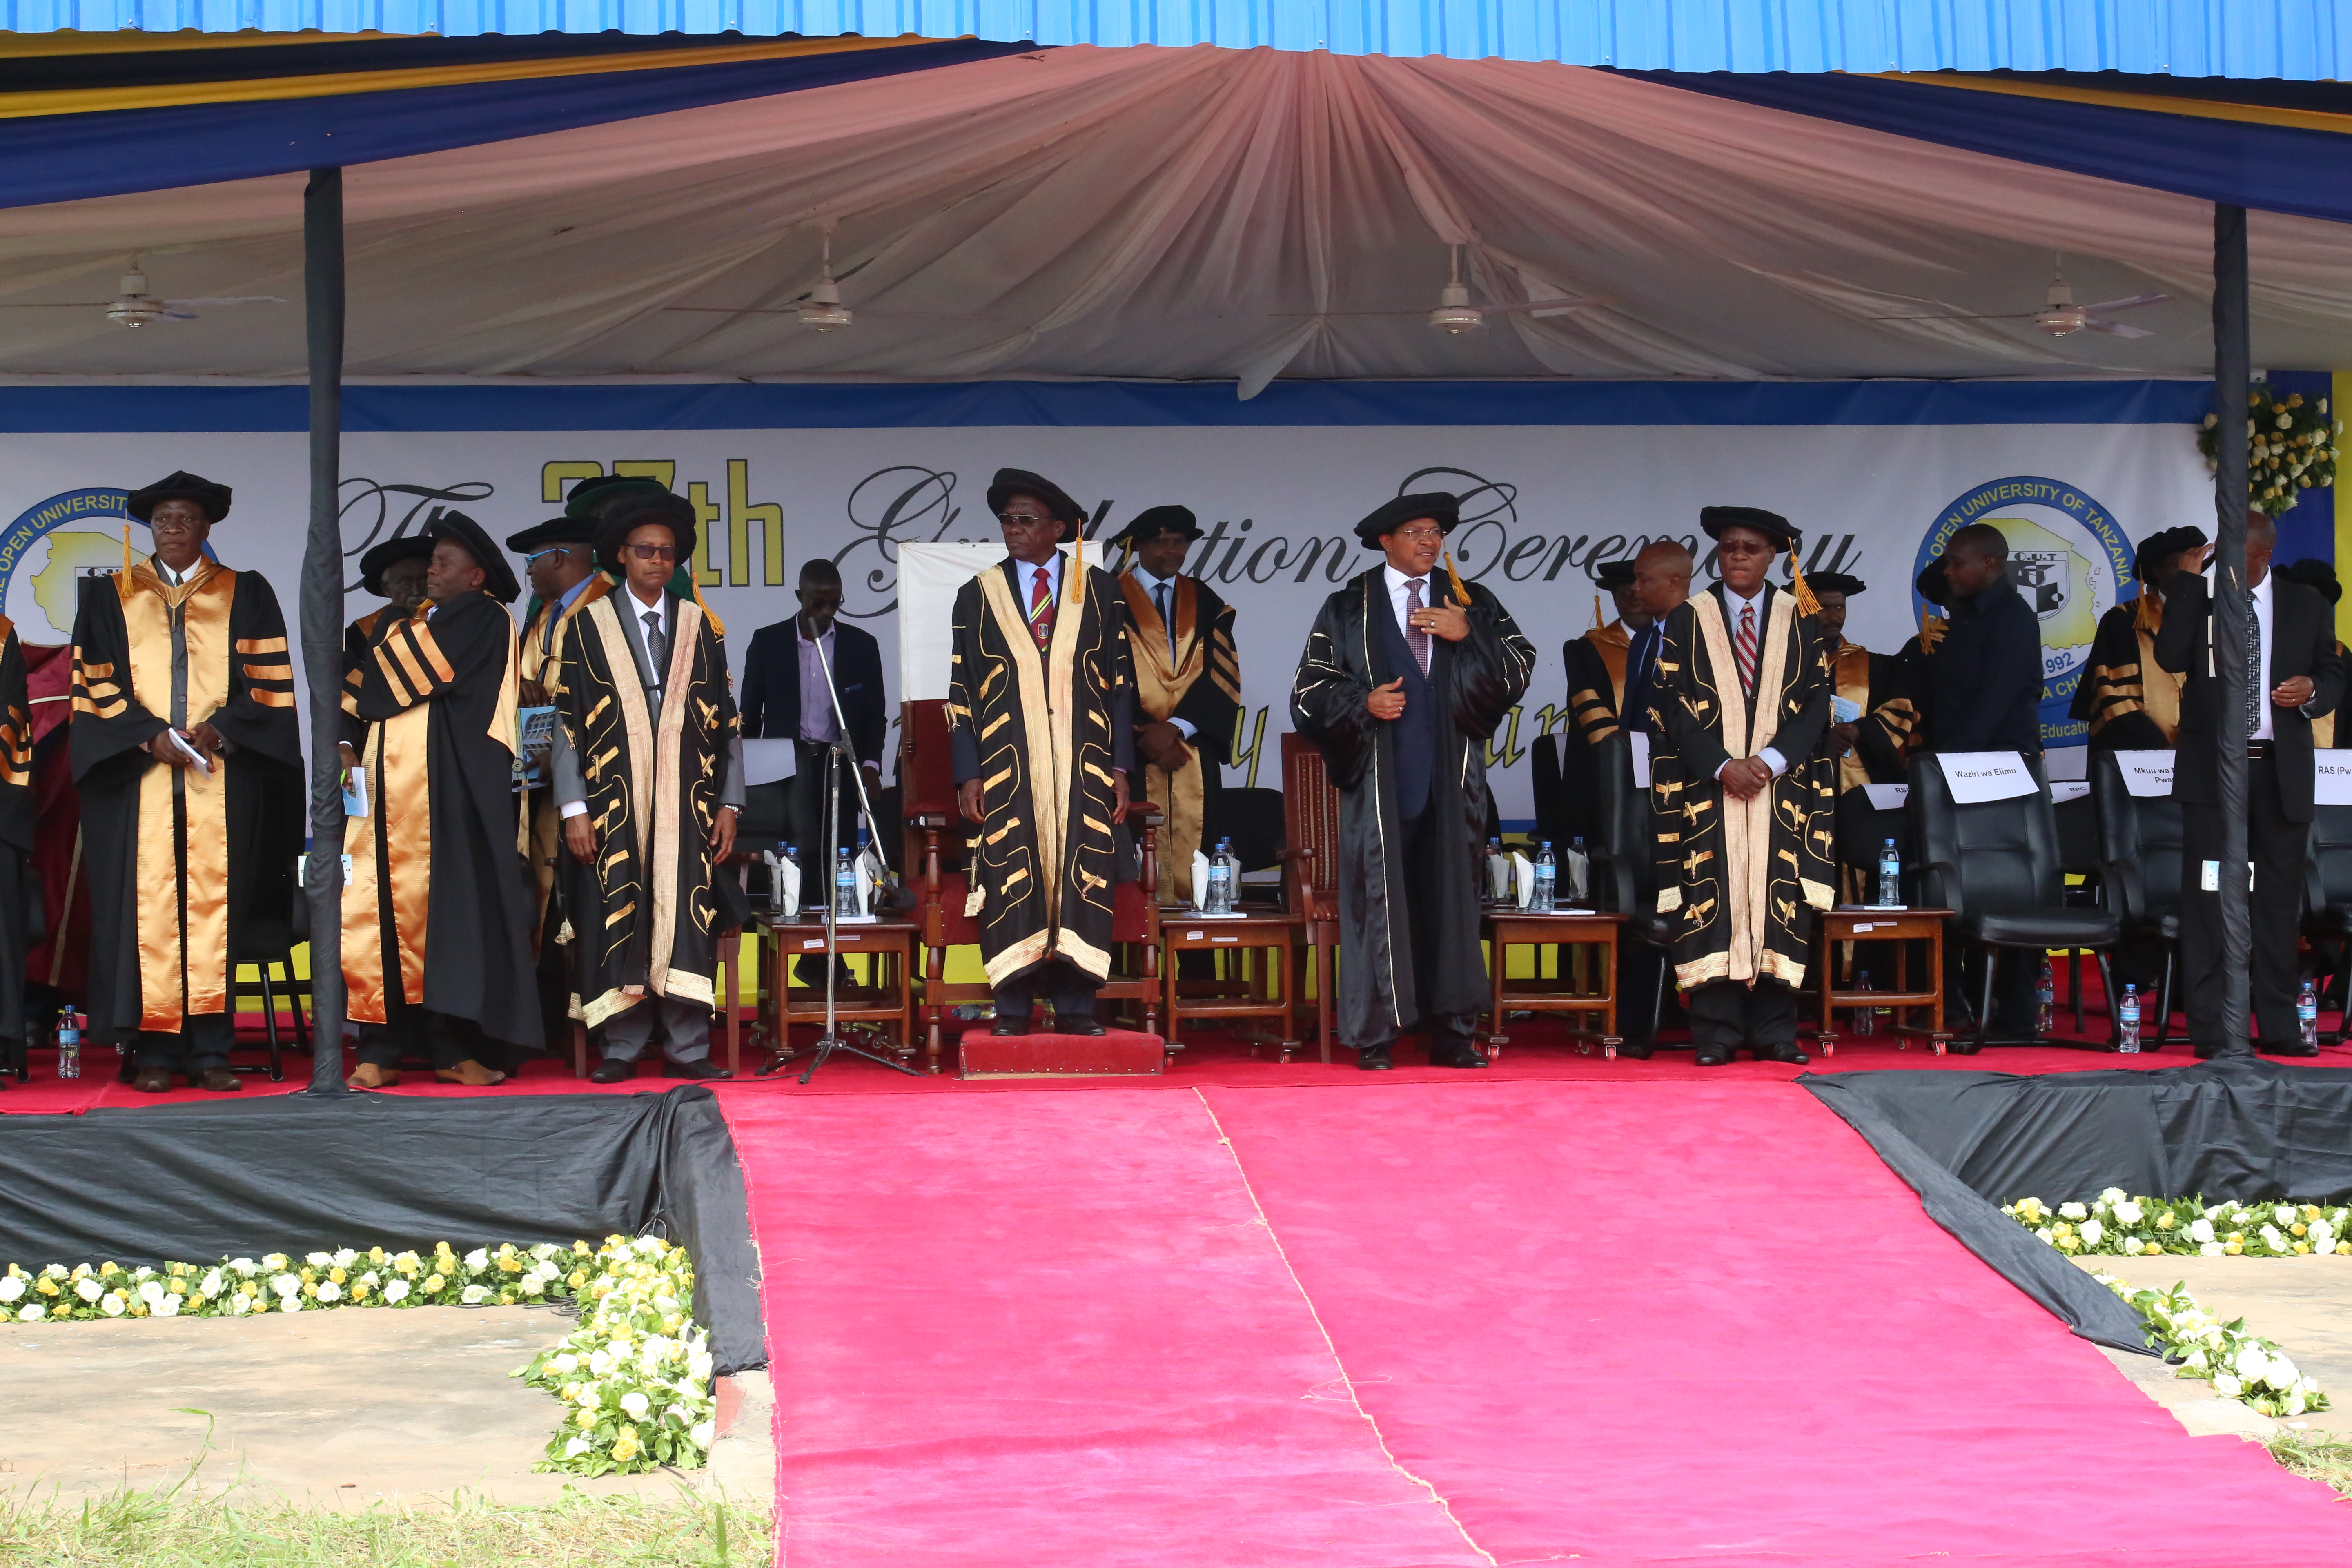 High table; guest of honor former President of the United Republic of Tanzania Hon. Dr. JakayaKikwete together with the management of the Open University of Tanzania shortly before the commencing of  37th graduation ceremonyof the Open University of Tanzania held on 28th September 2019 at Bungo, Kibaha